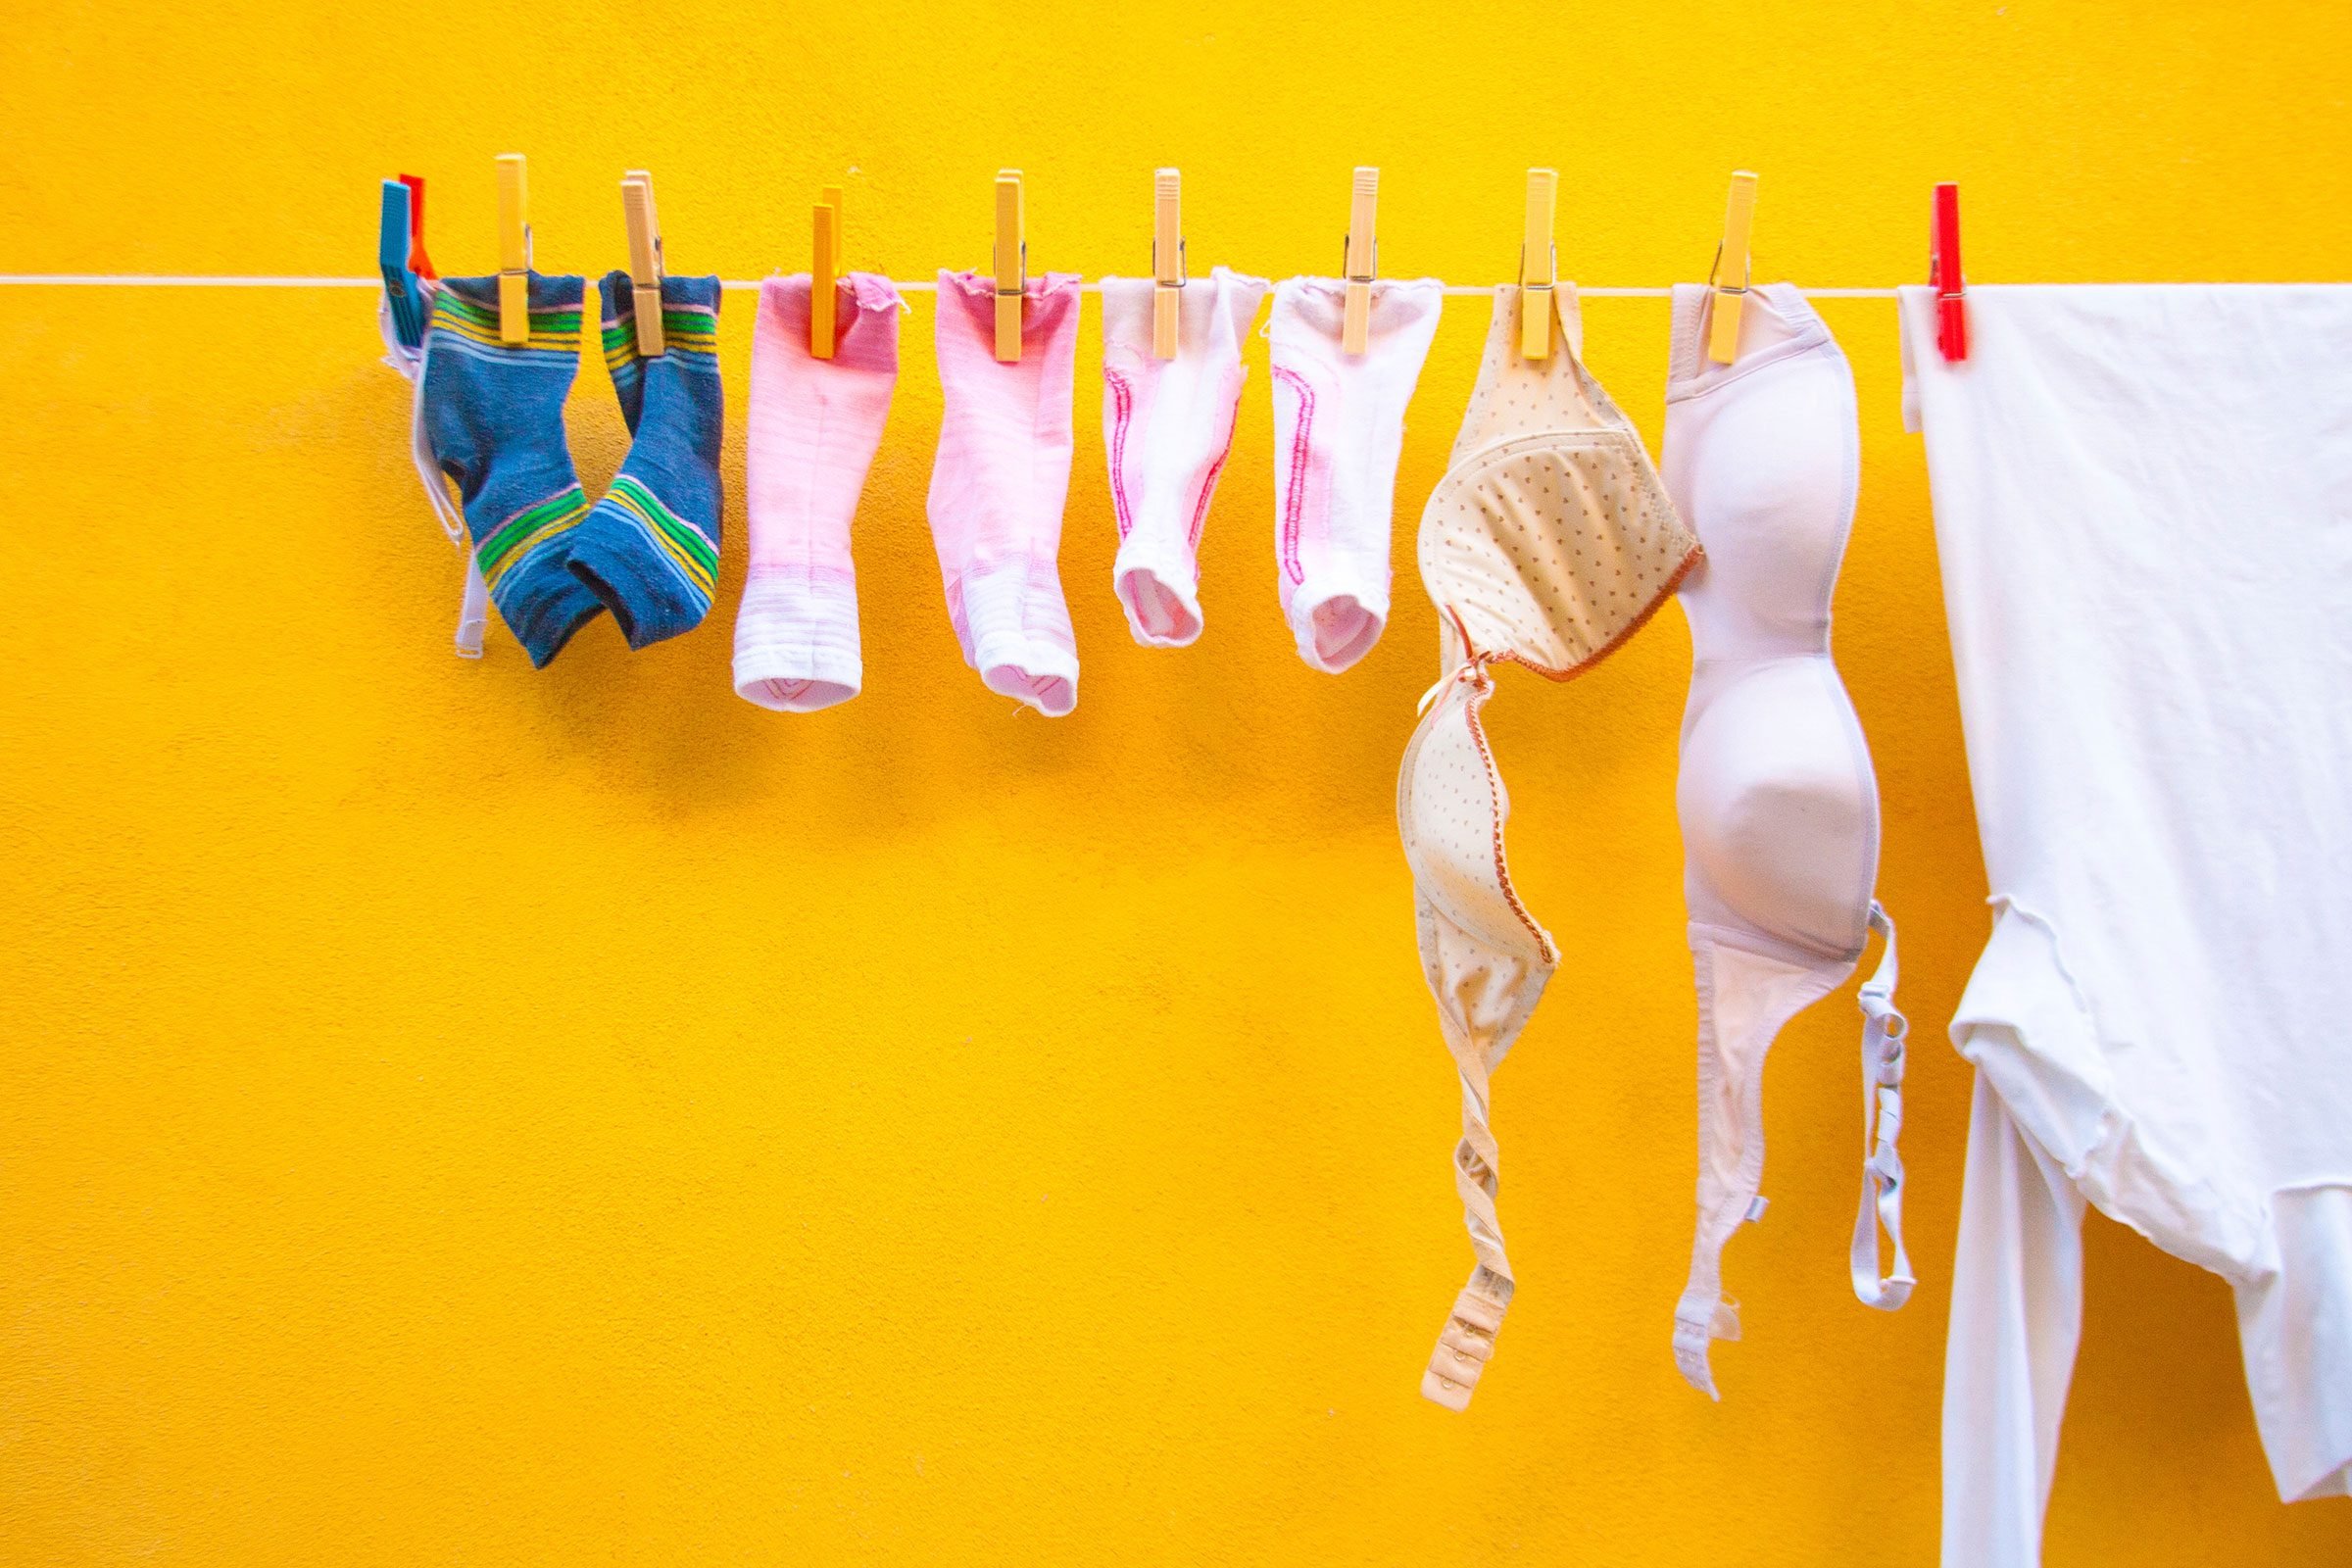 5 Mistakes You're Making When Washing Your Bra